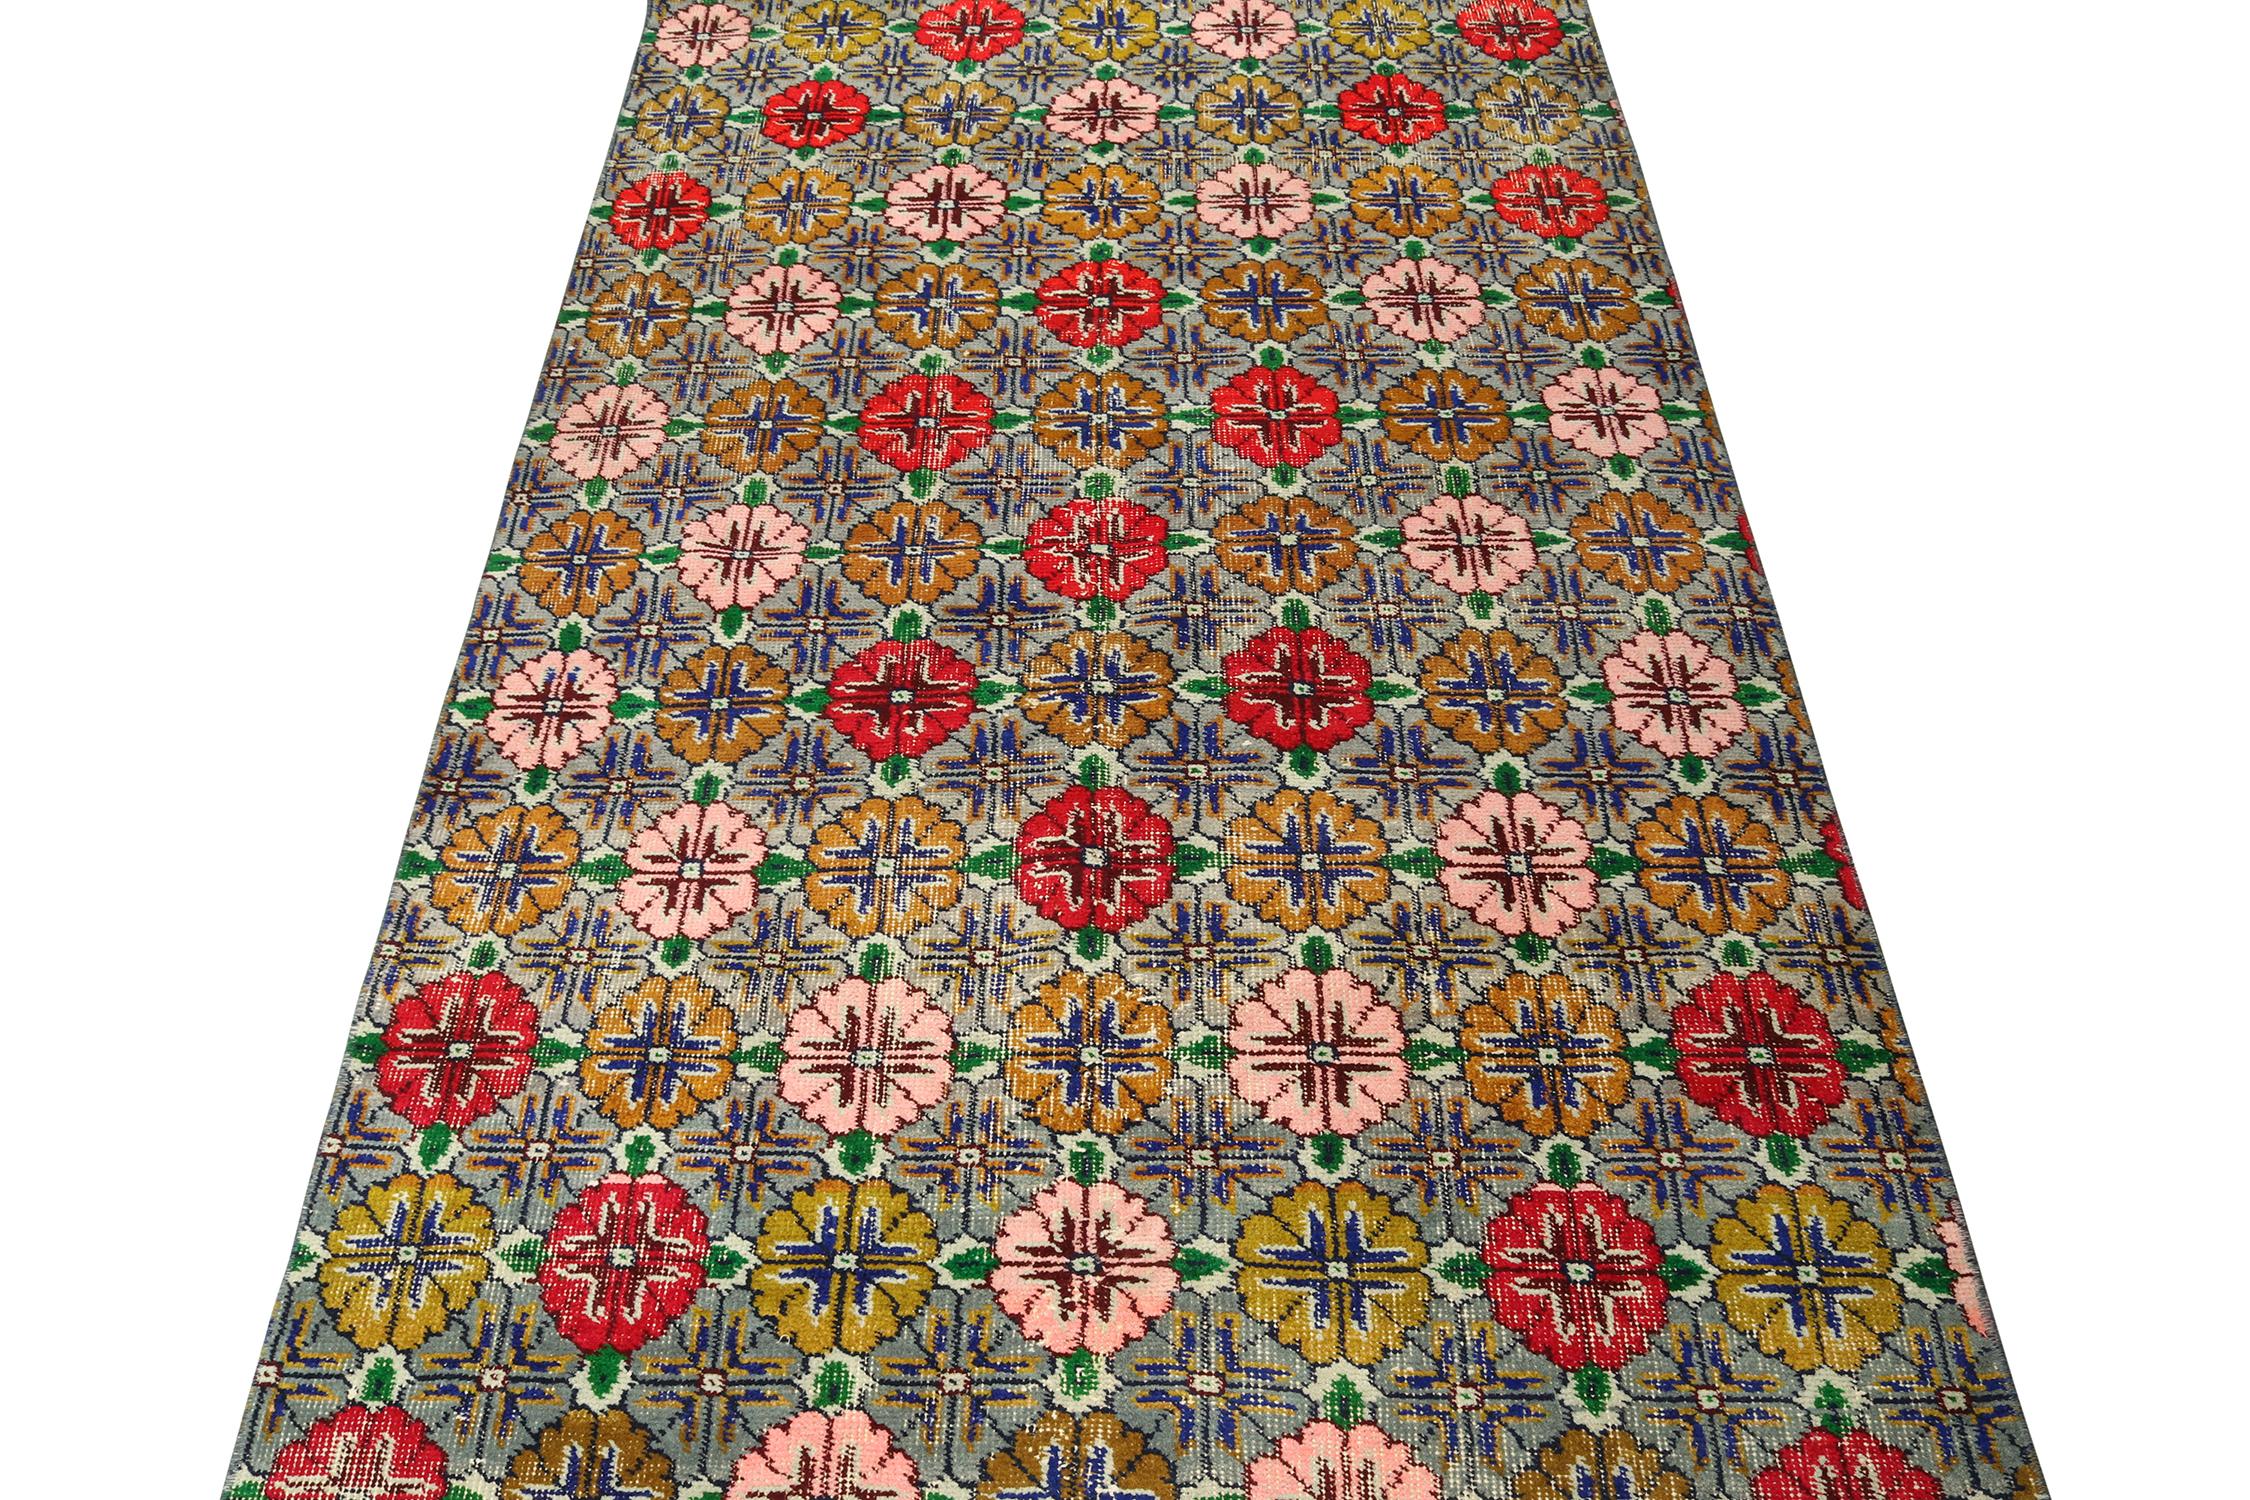 This vintage 3x6 runner is a new addition to Rug & Kilim’s Mid-Century Pasha Collection. This line is a commemoration, with rare curations we believe to hail from multidisciplinary Turkish designer Zeki Müren.

Further on the Design:

This design